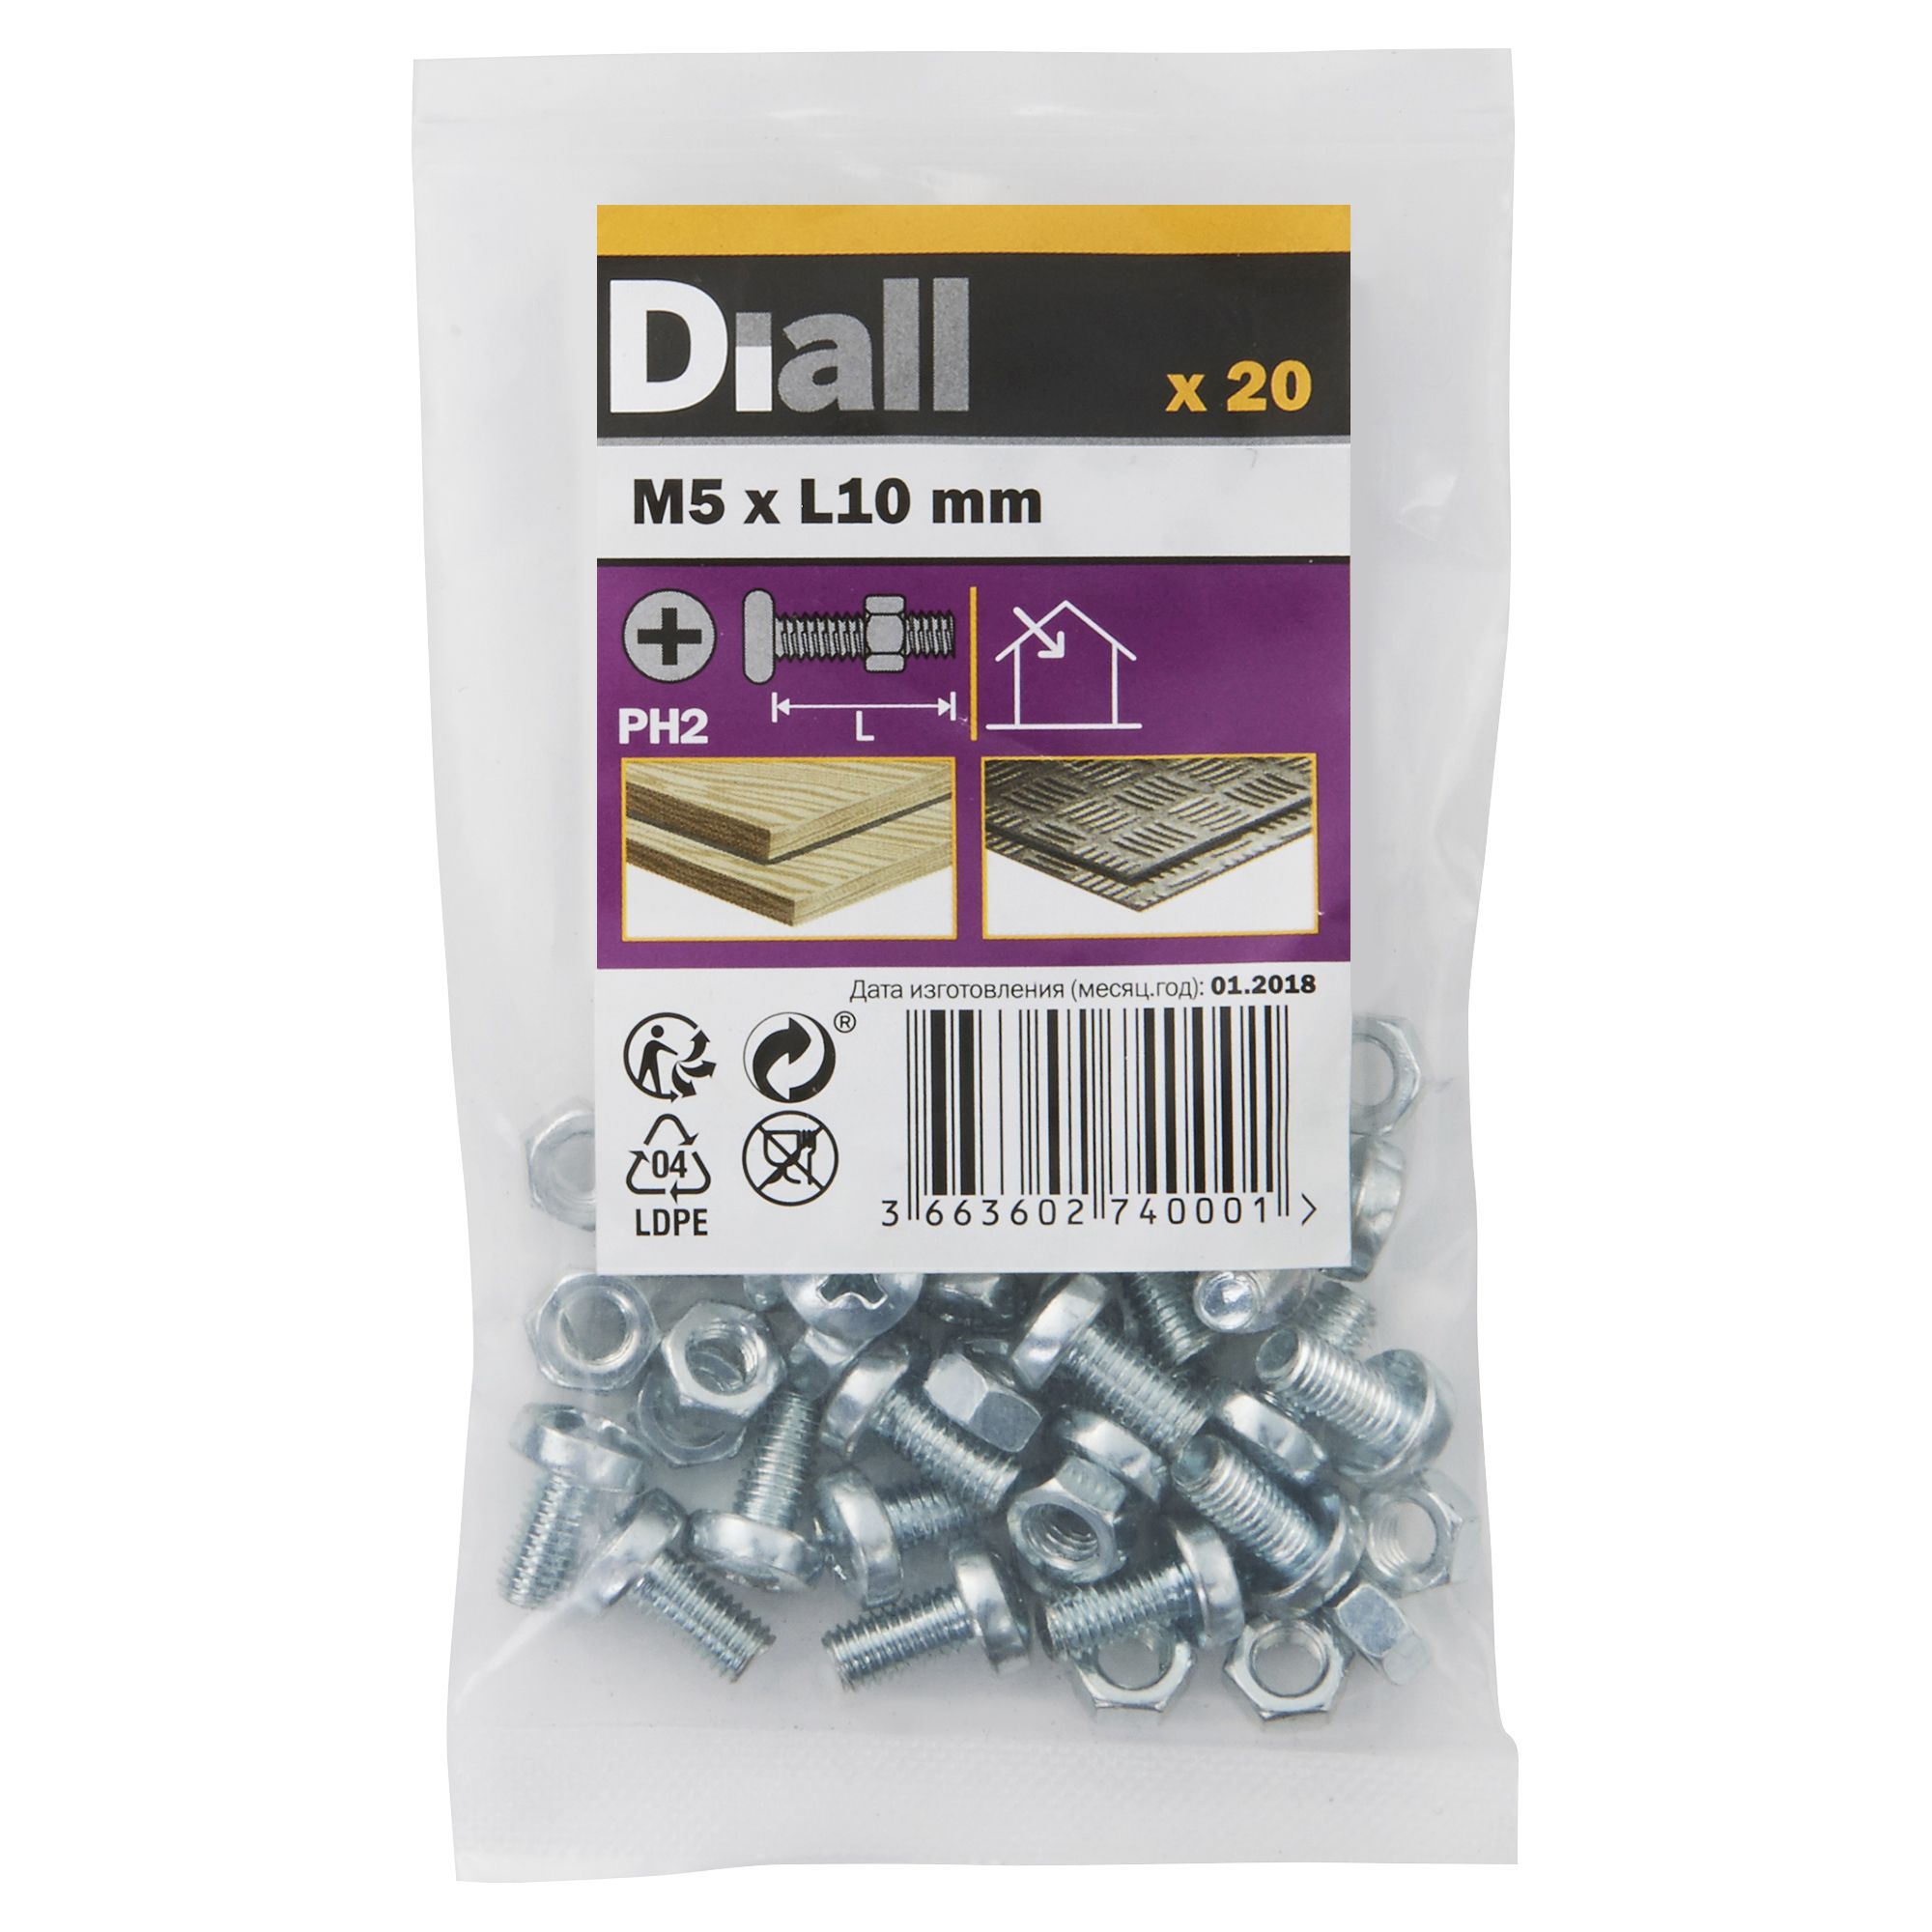 Diall M5 Cruciform Philips Pan head Zinc-plated Carbon steel Machine screw & nut (Dia)5mm (L)10mm, Pack of 20